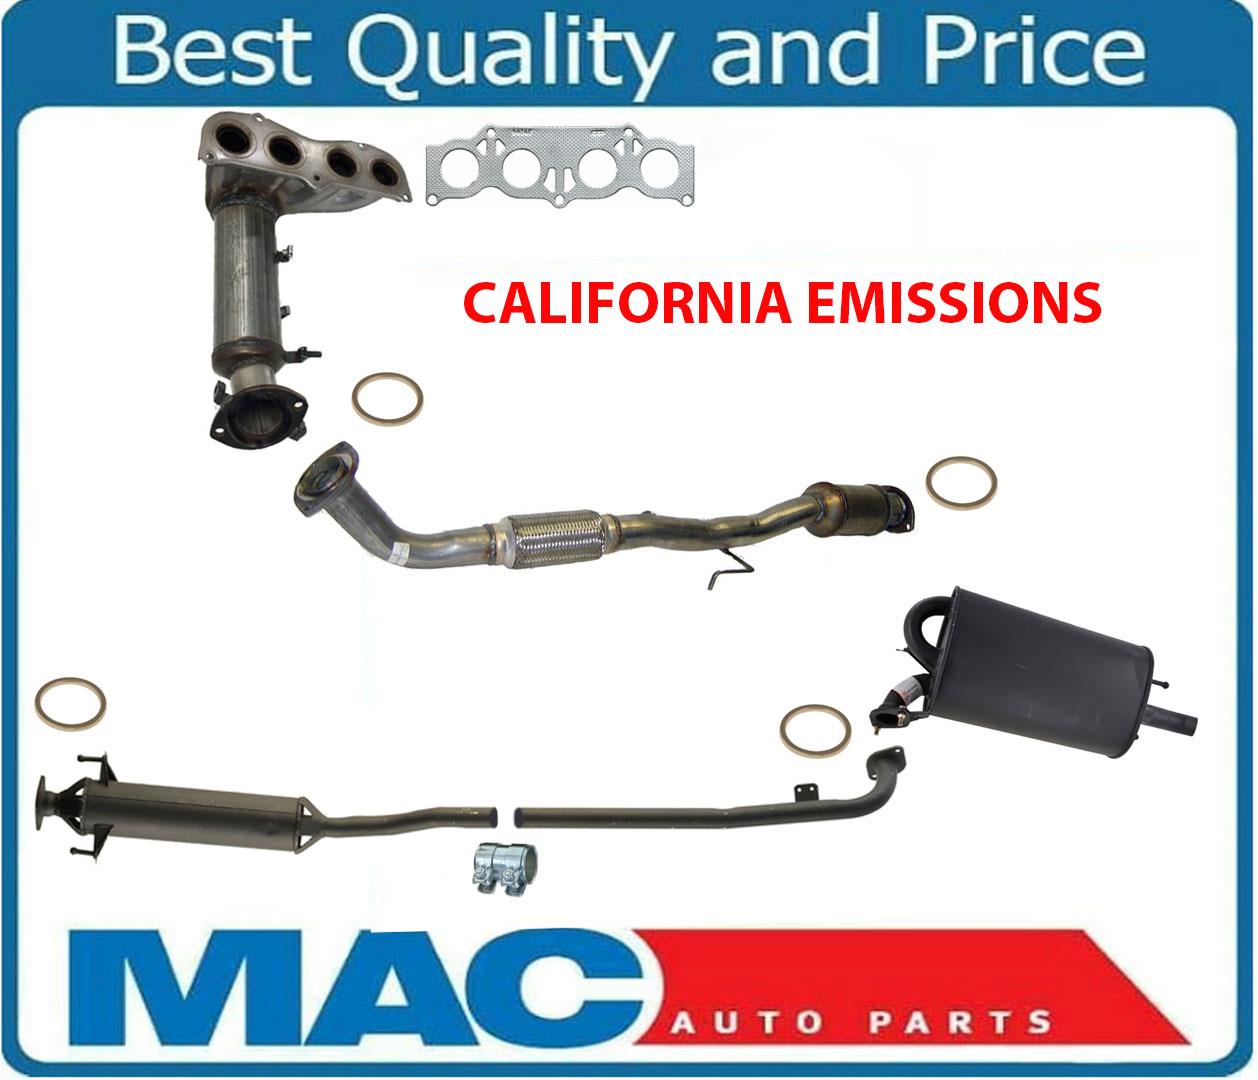 Full Exhaust System For Toyota Camry 03-05 2.4L With California Emissions ONLY! | eBay